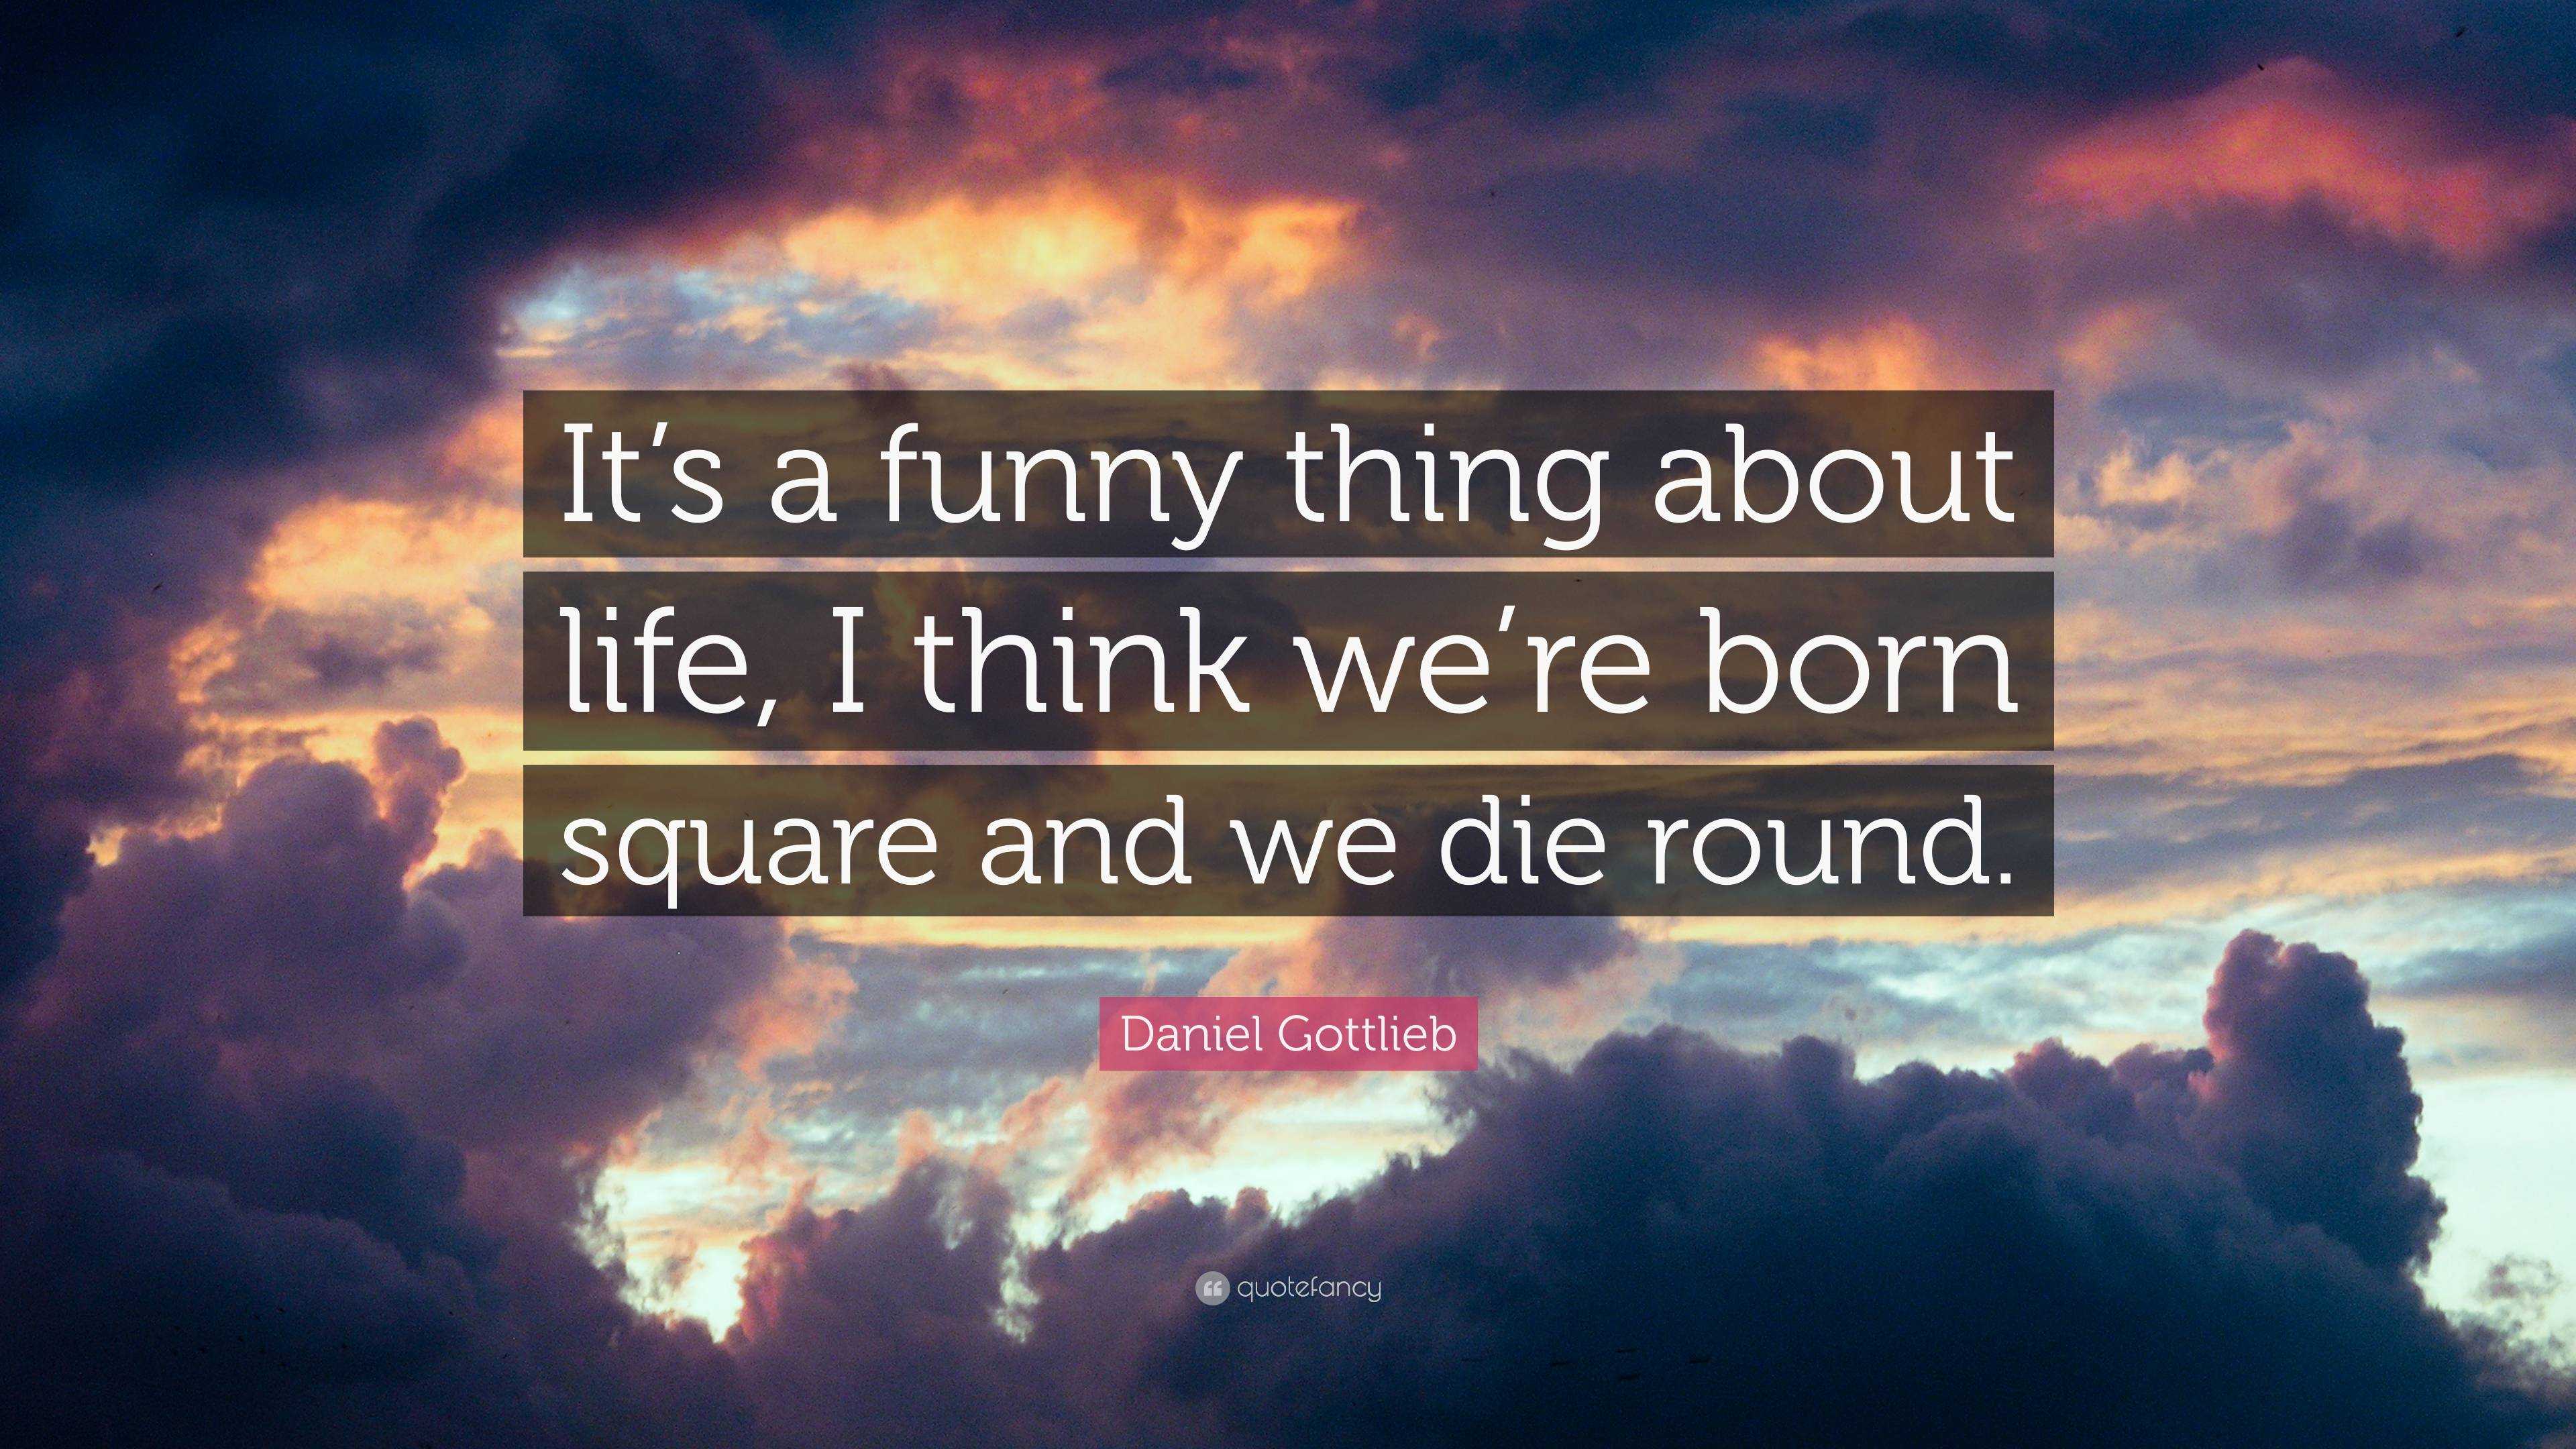 Daniel Gottlieb Quote: “It's a funny thing about life, I think we're born  square and